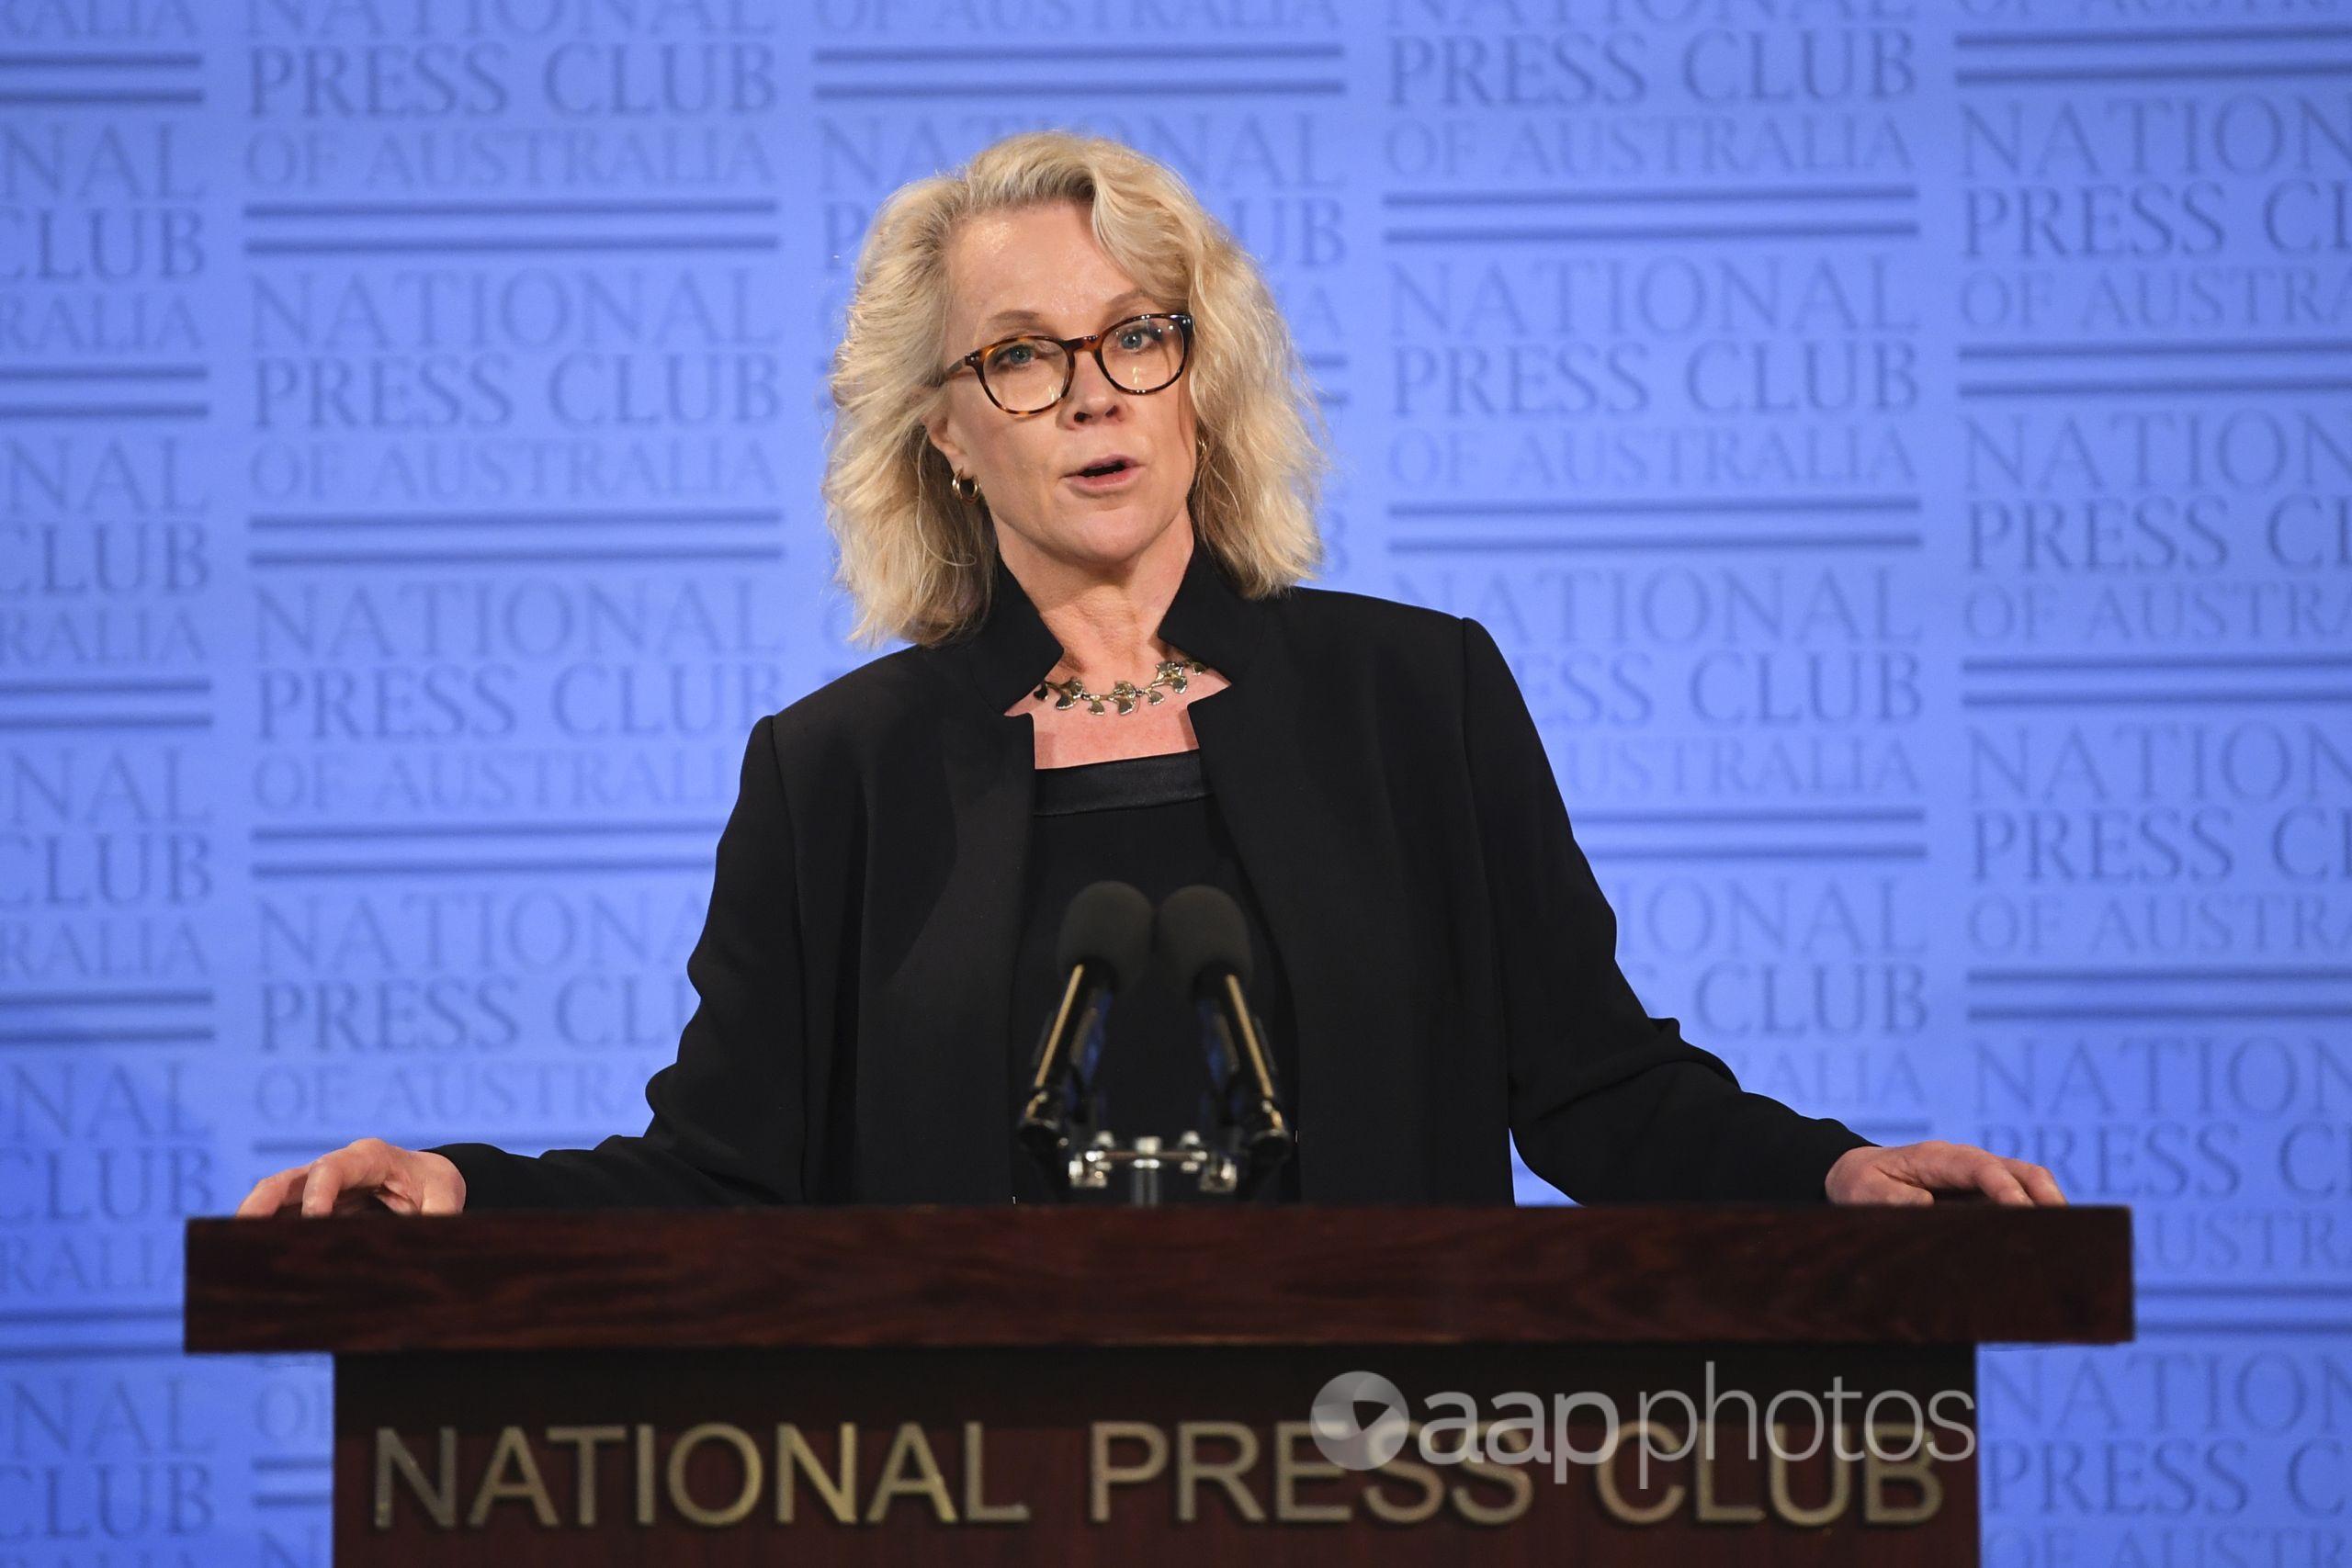 Laura Tingle addressing the National Press Club in Canberra